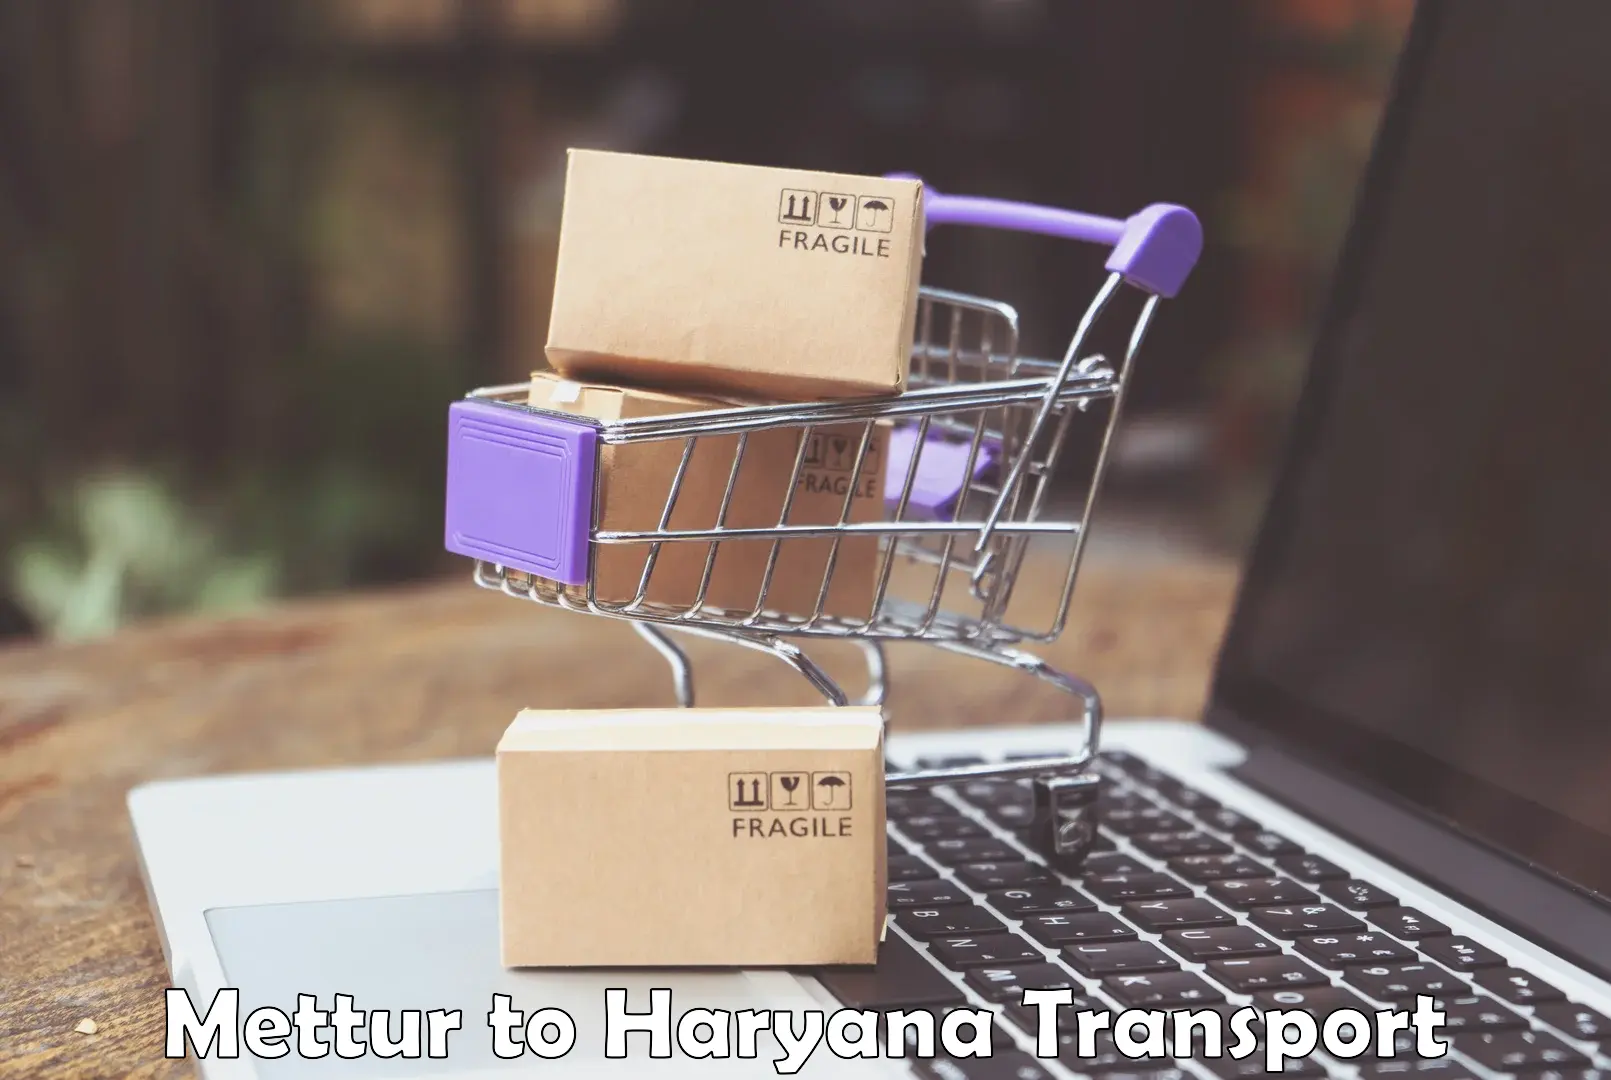 Nationwide transport services Mettur to Haryana